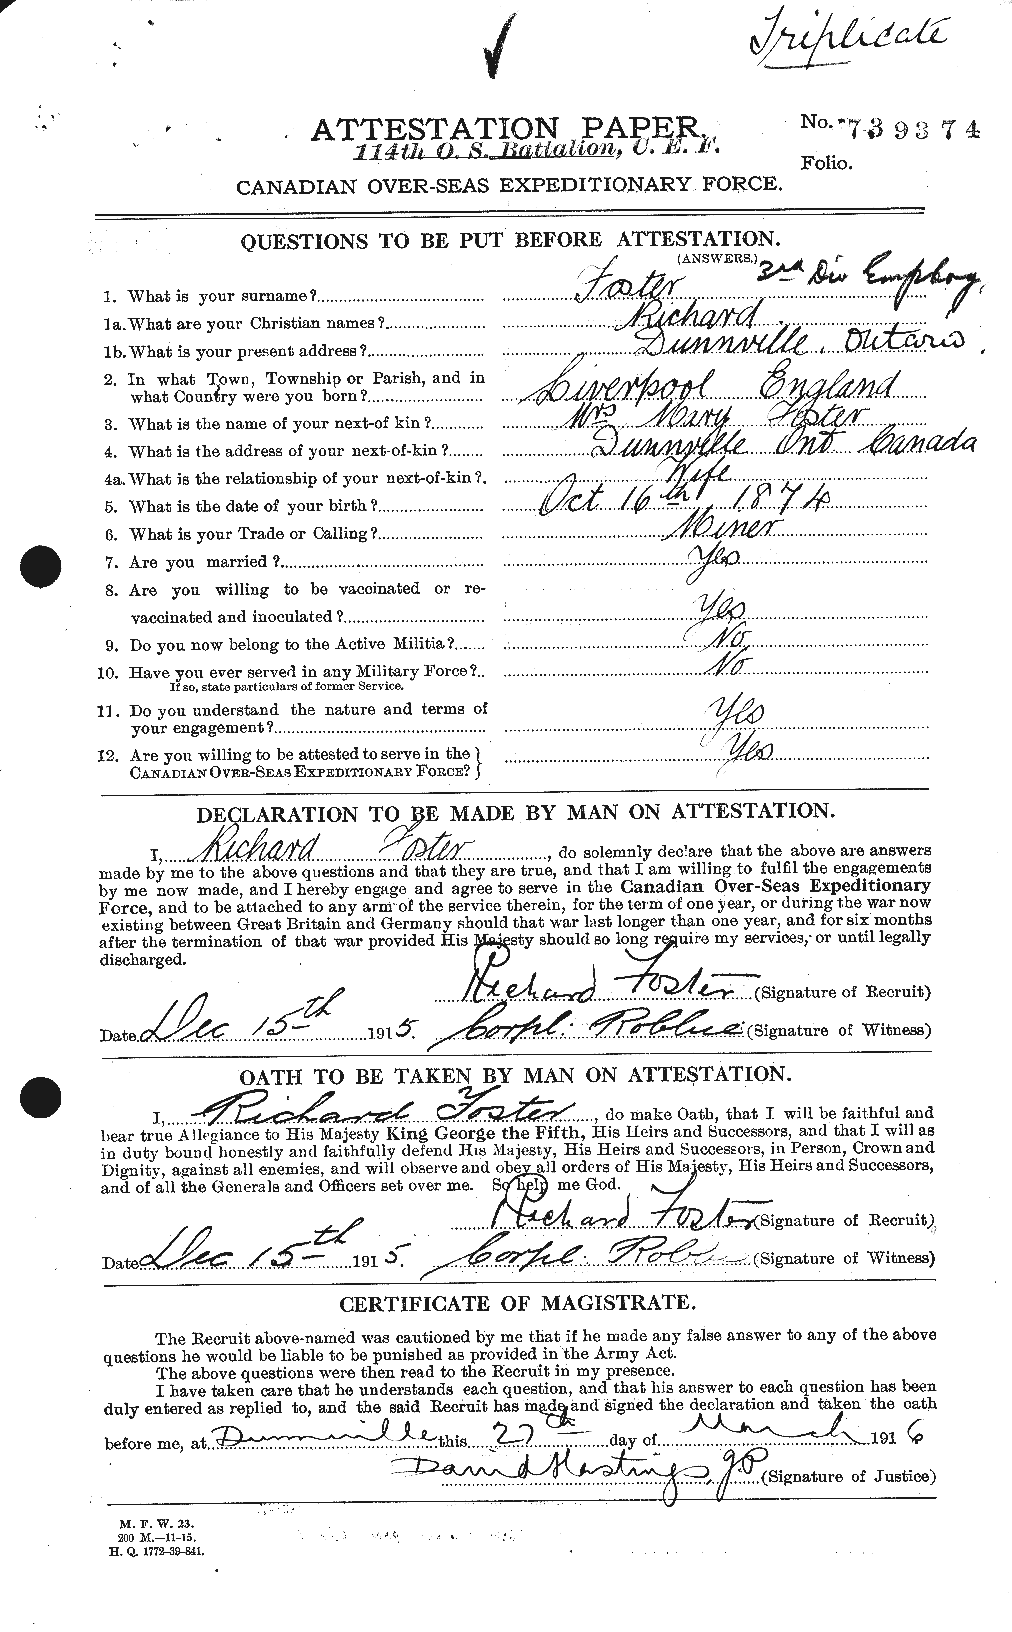 Personnel Records of the First World War - CEF 335157a